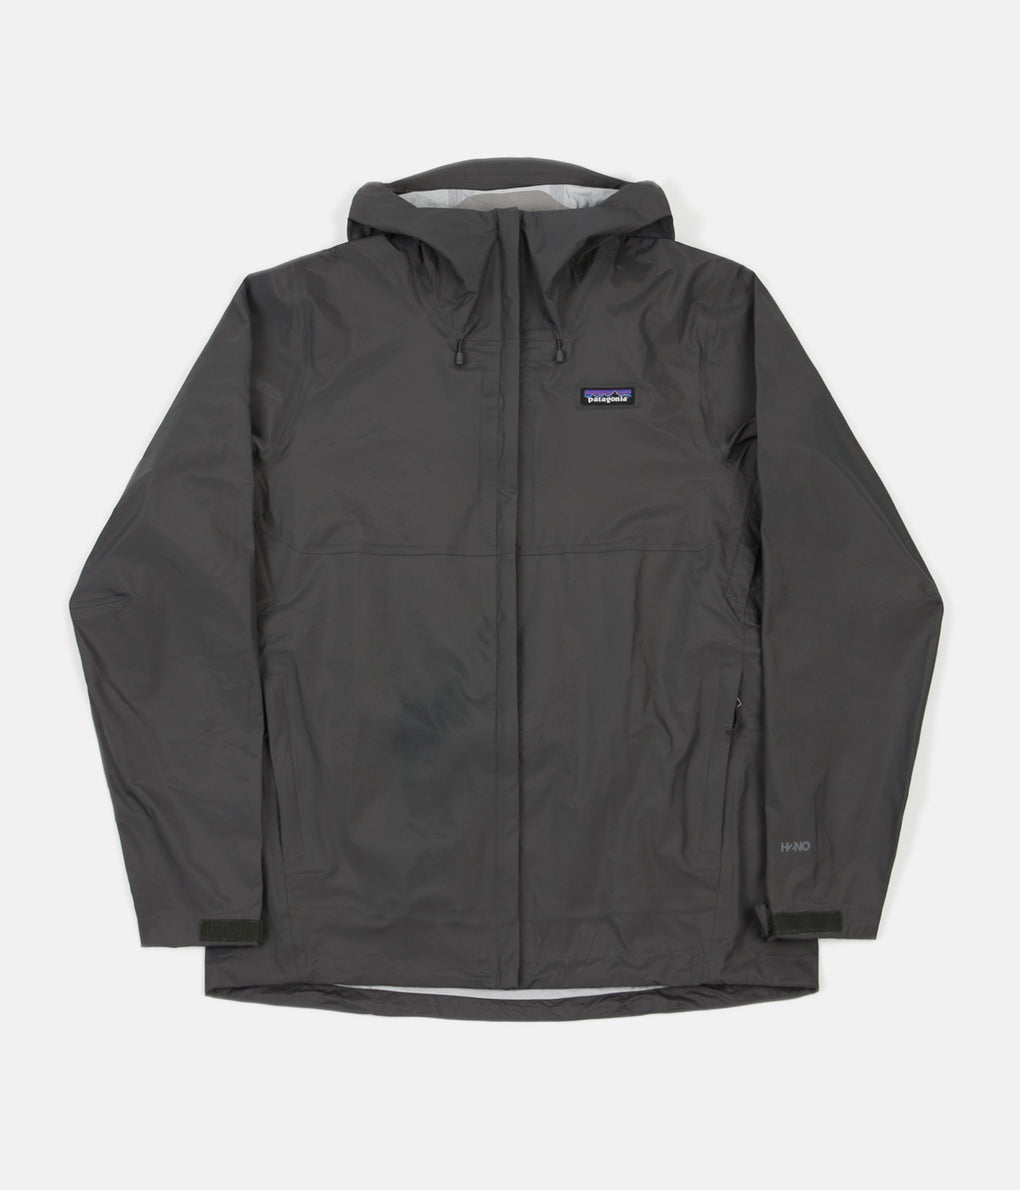 Patagonia Torrentshell 3L Jacket - Forge Grey | Always in Colour